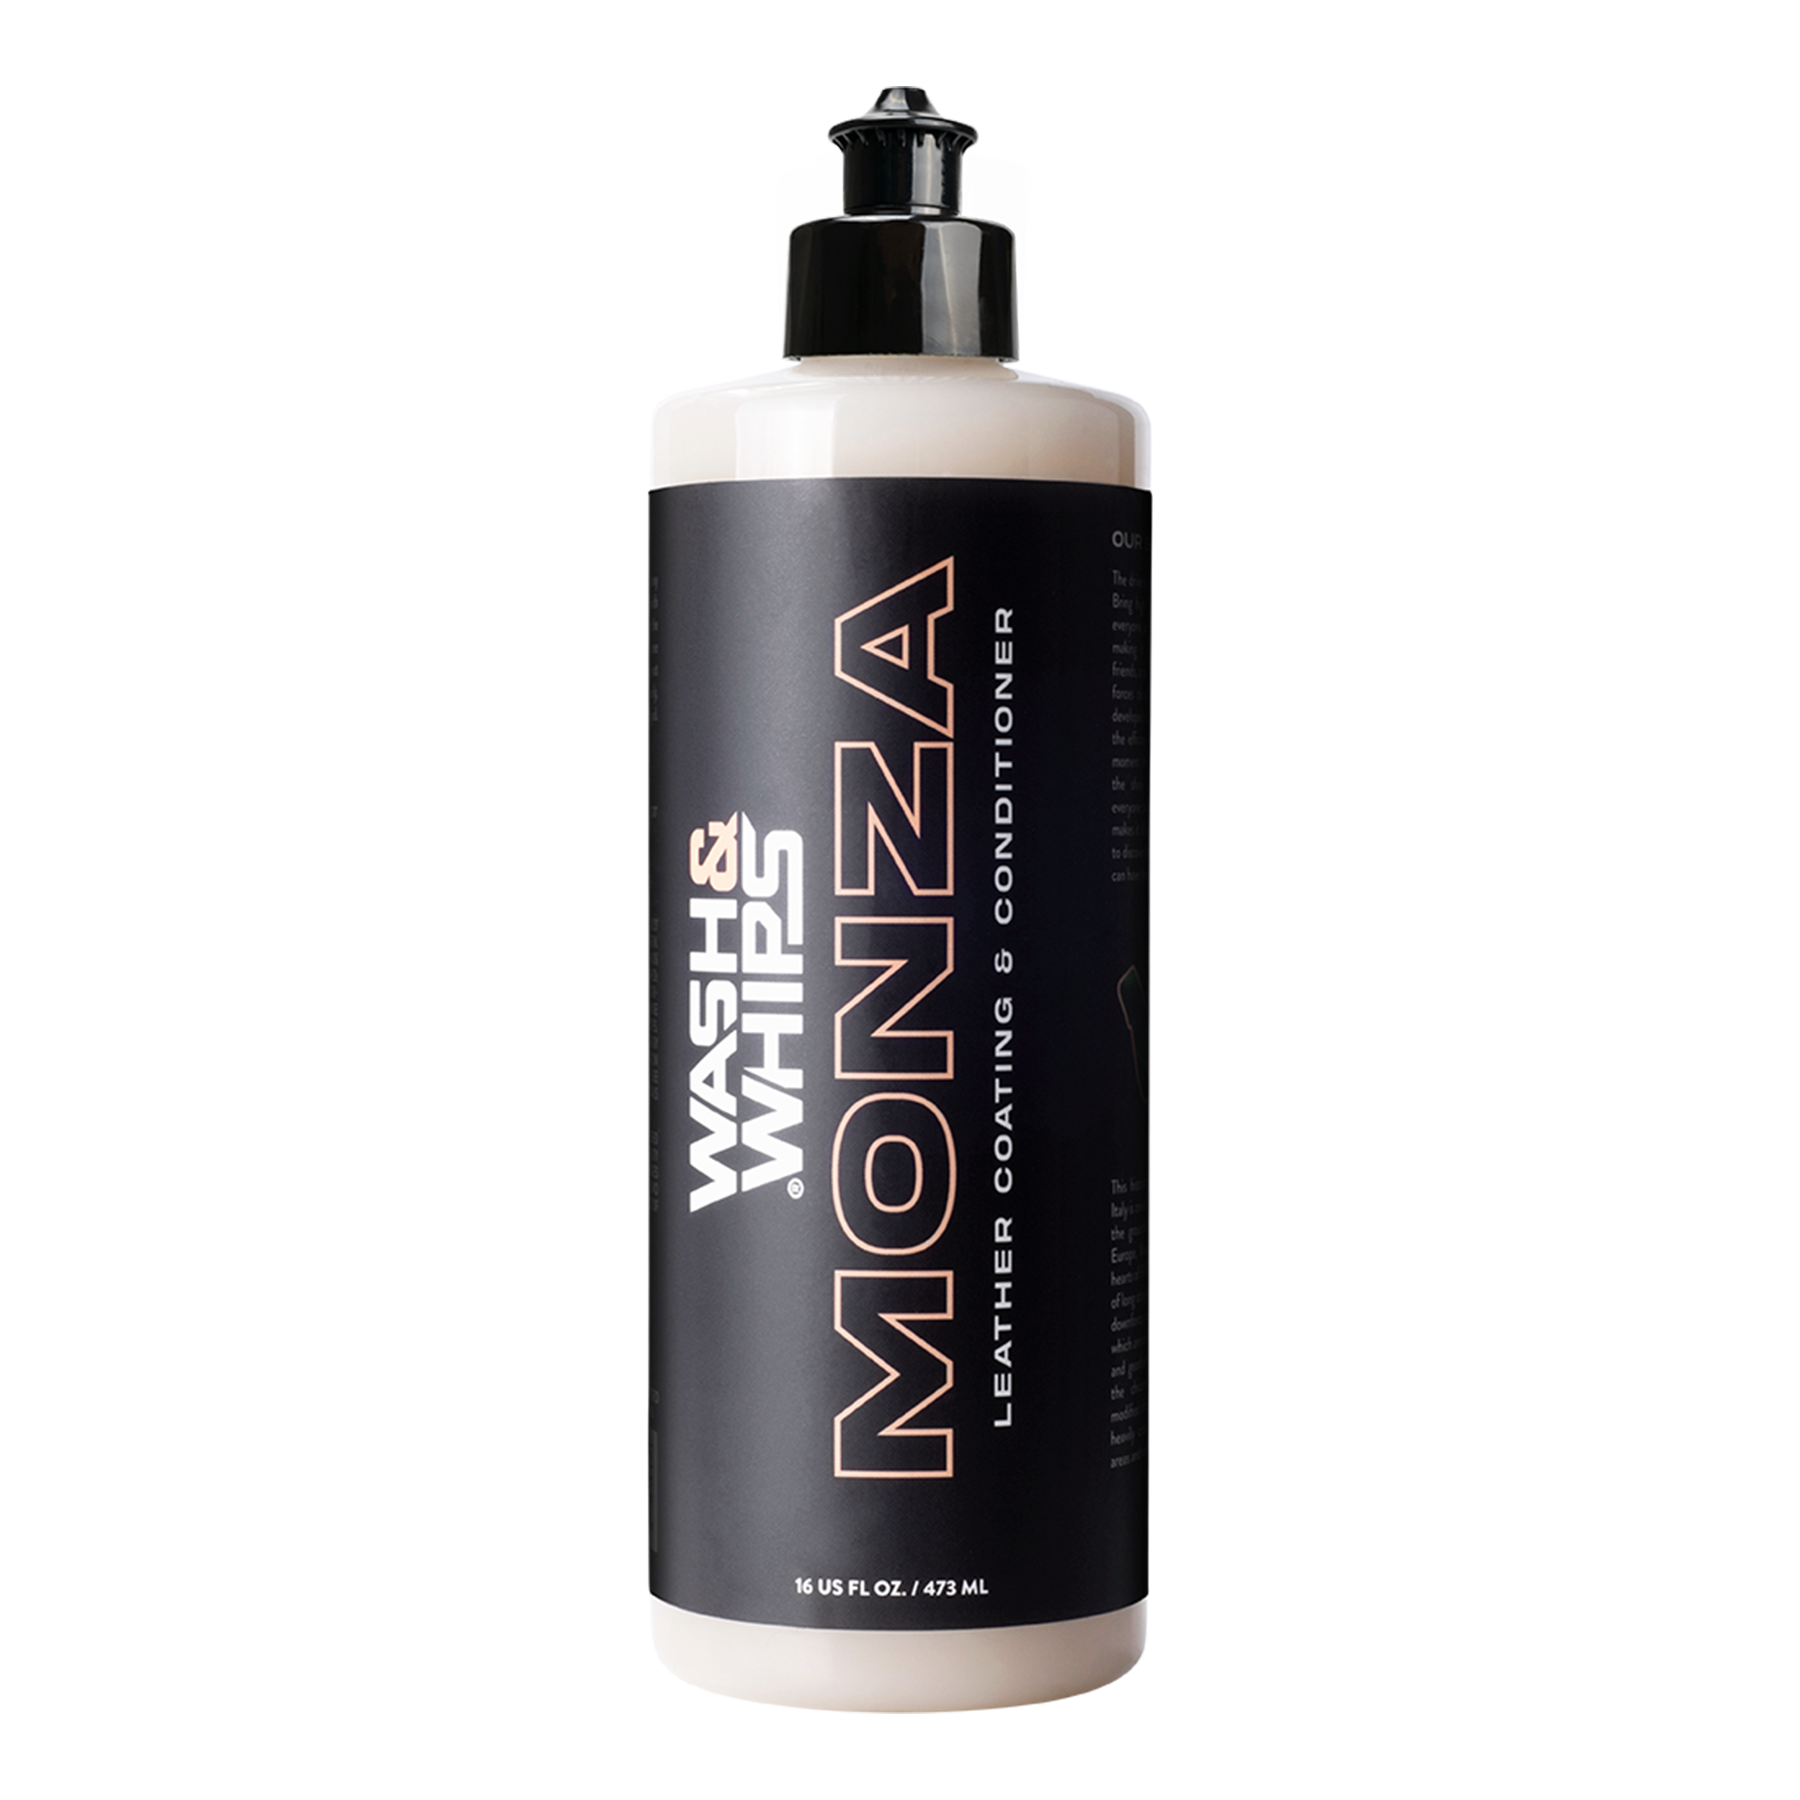 Monza Leather Coating & Conditioner